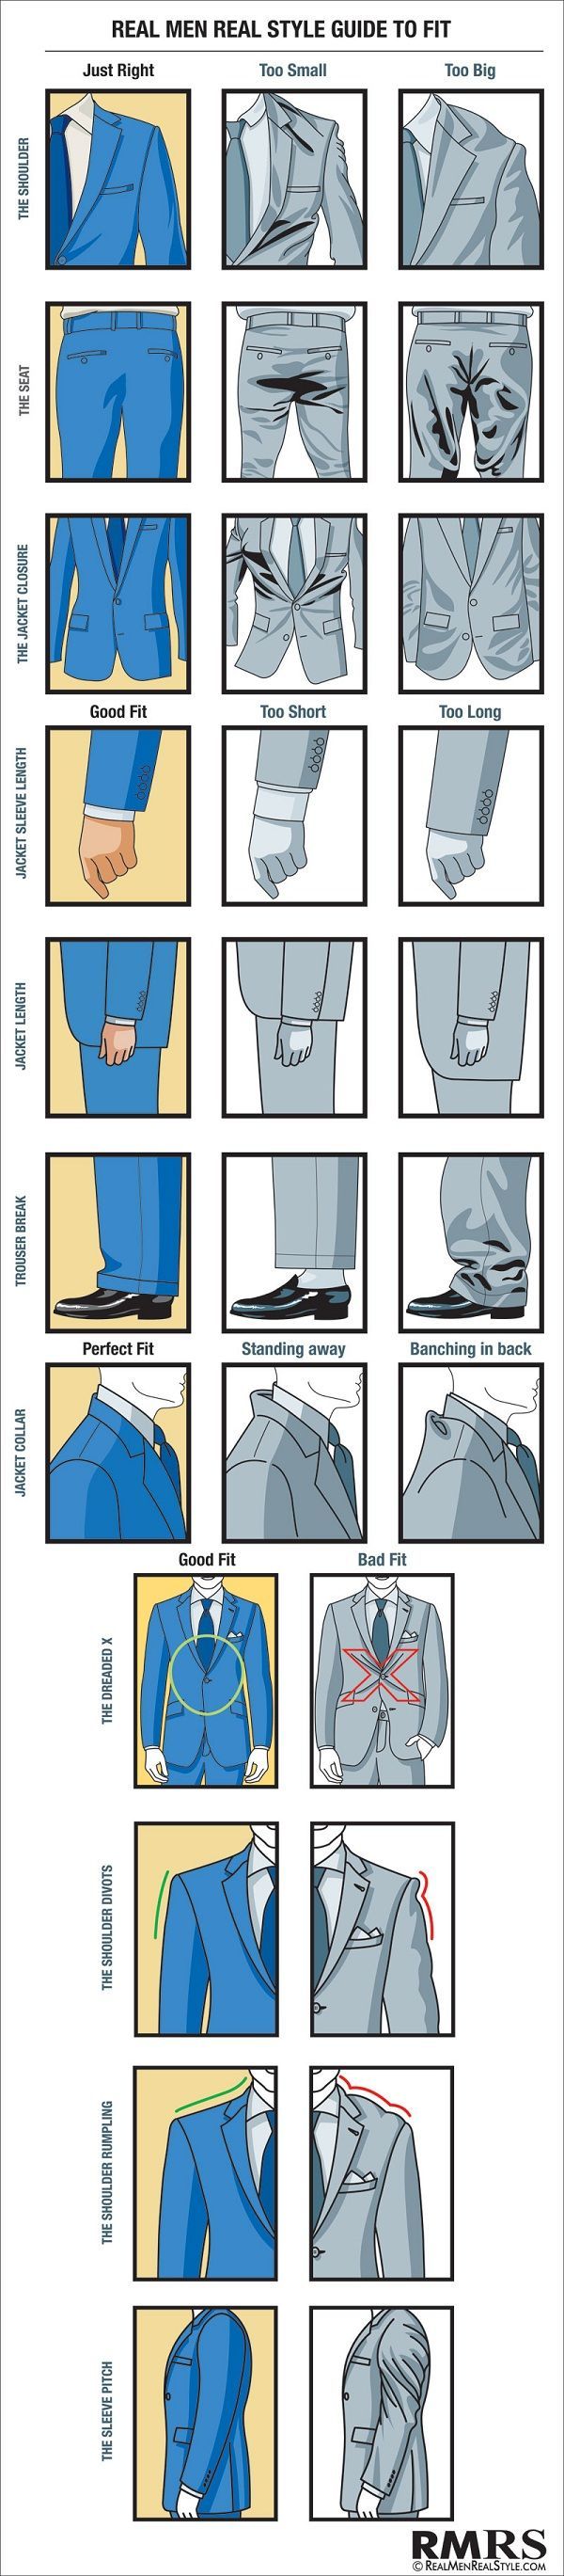 Proper Fit For A Formal Business Suit (Infographic)